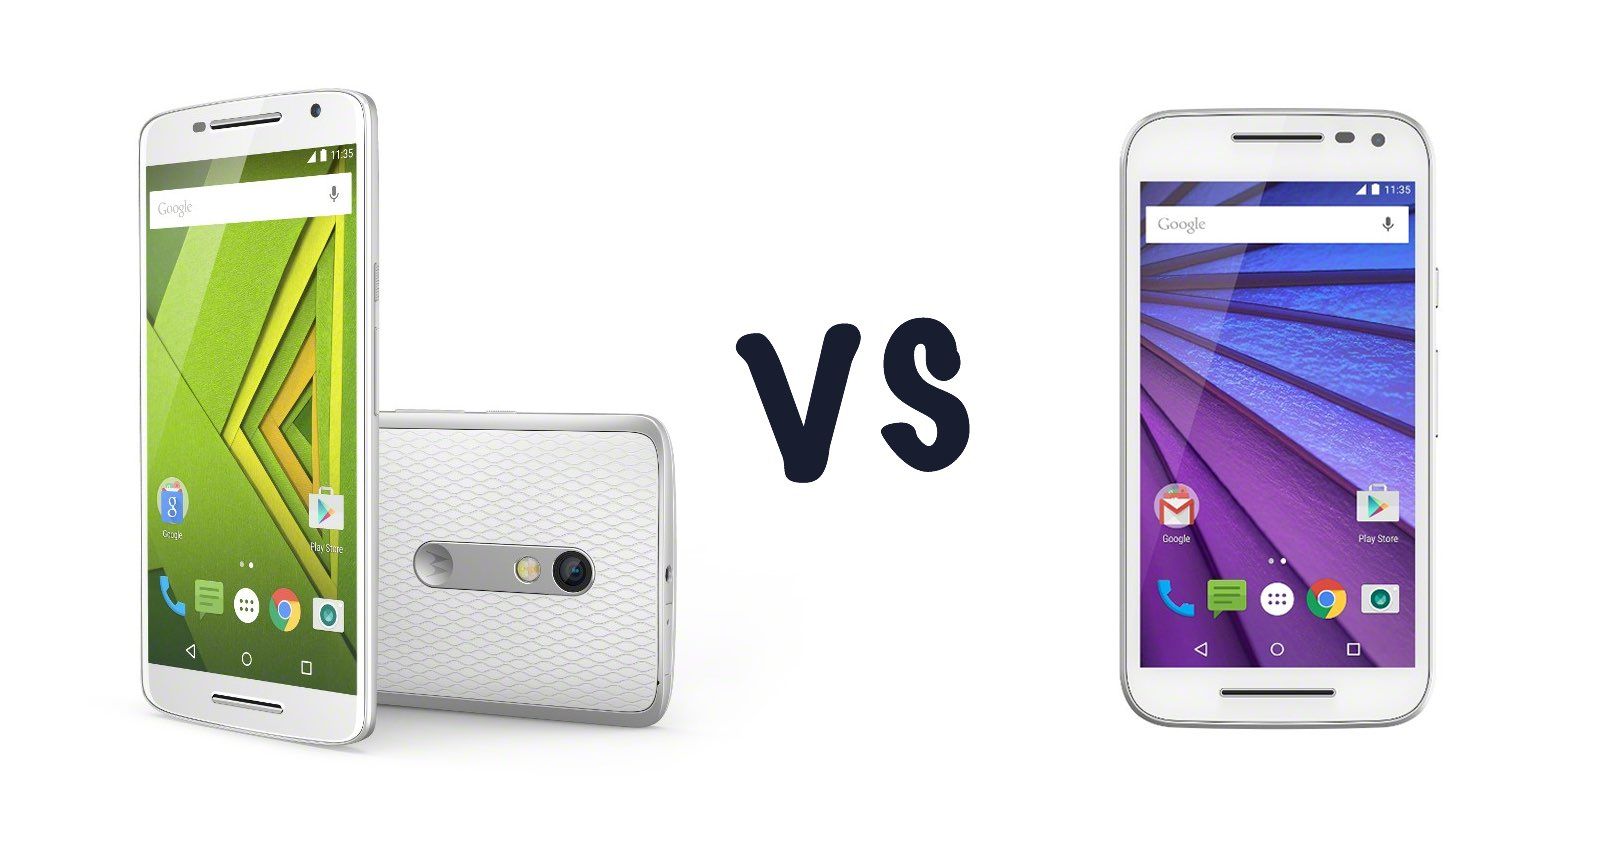 moto g 2015 third gen vs moto x play what’s the difference  image 1